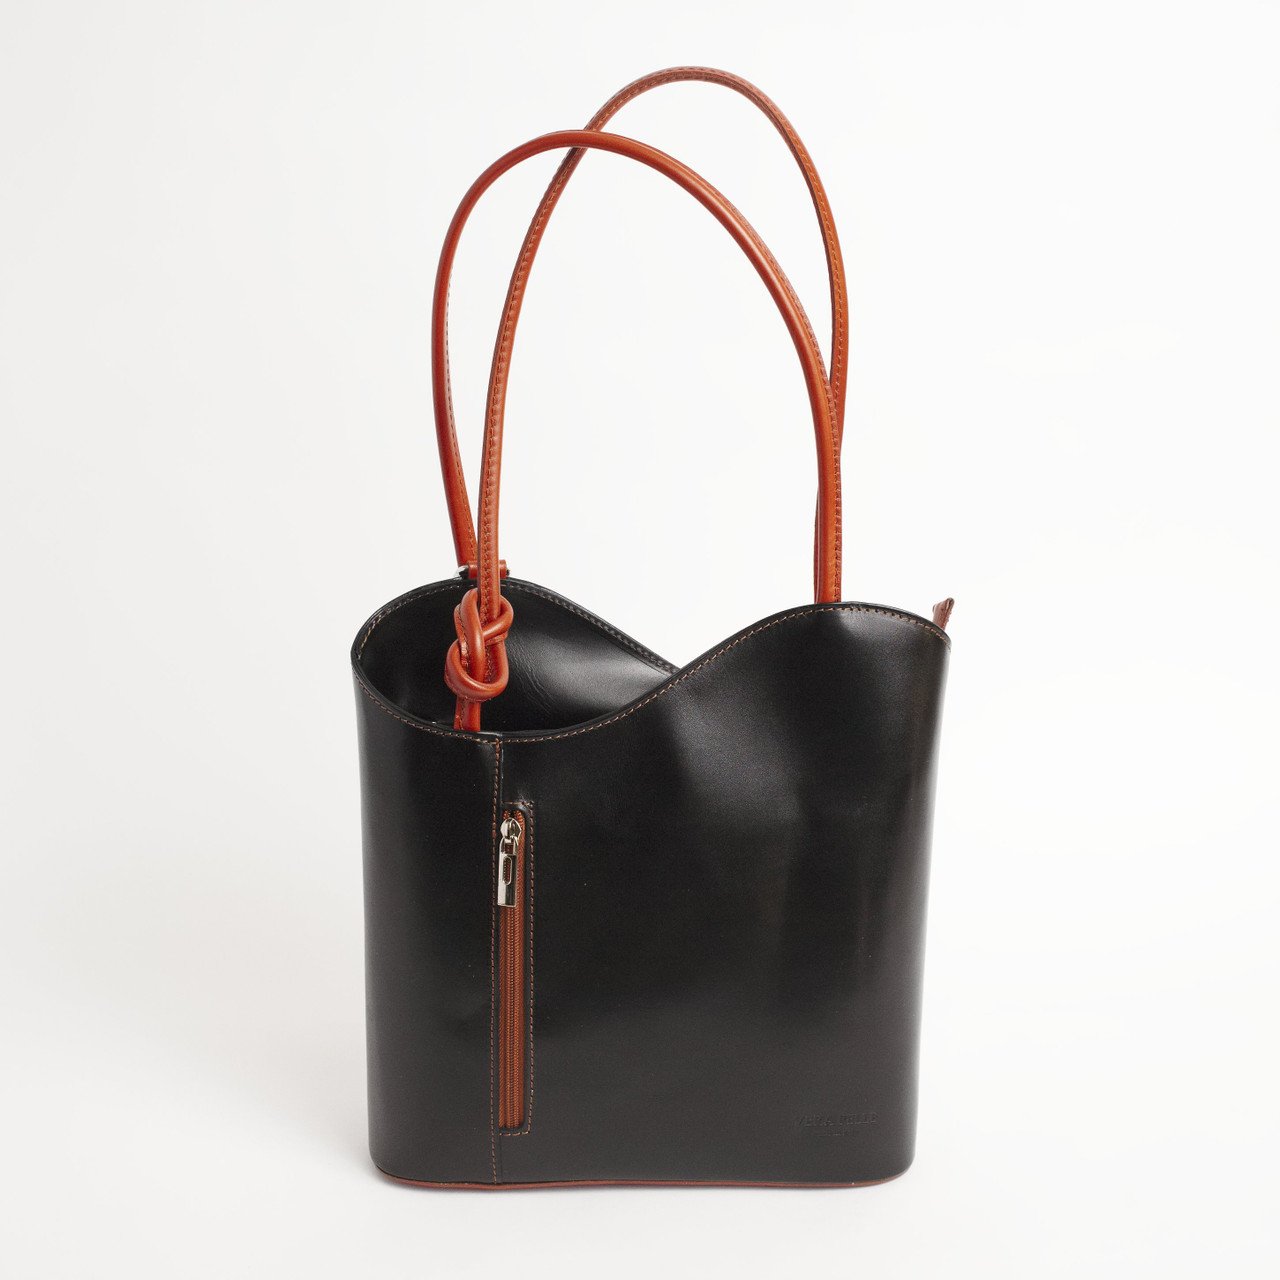 Black Convertible Leather Bag